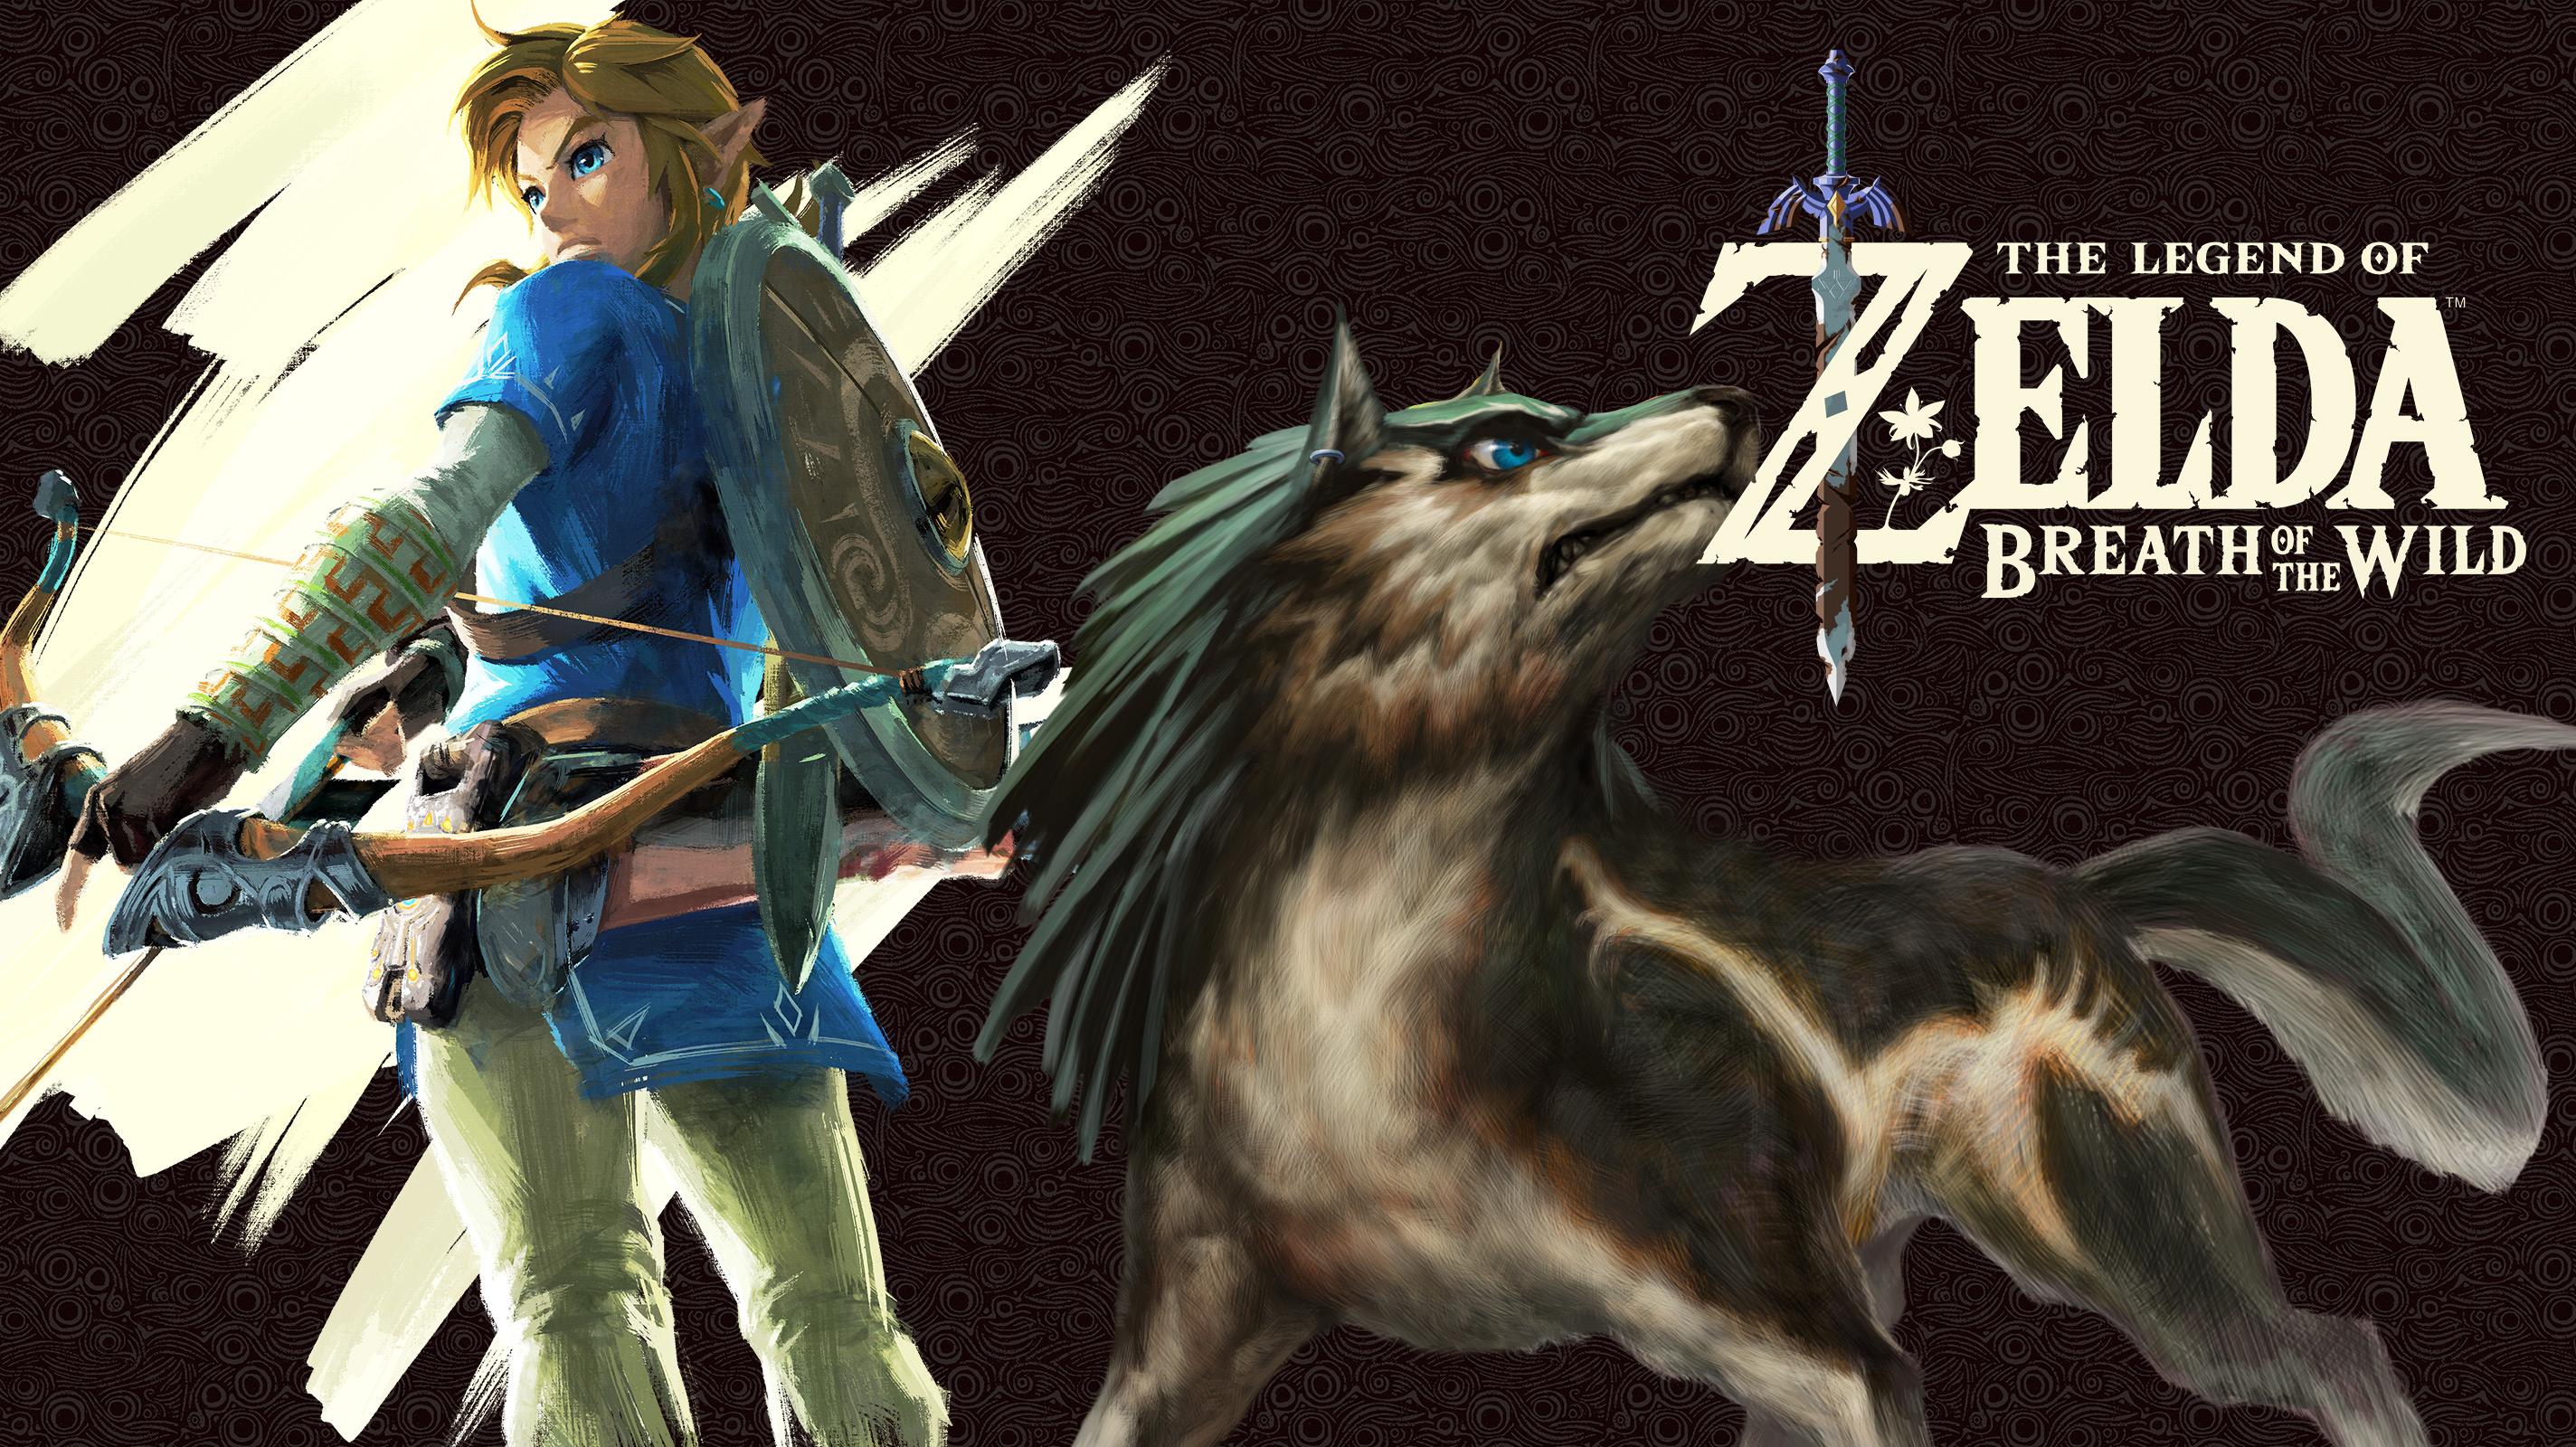 how to get wolf link more hearts in zelda breath of the wild